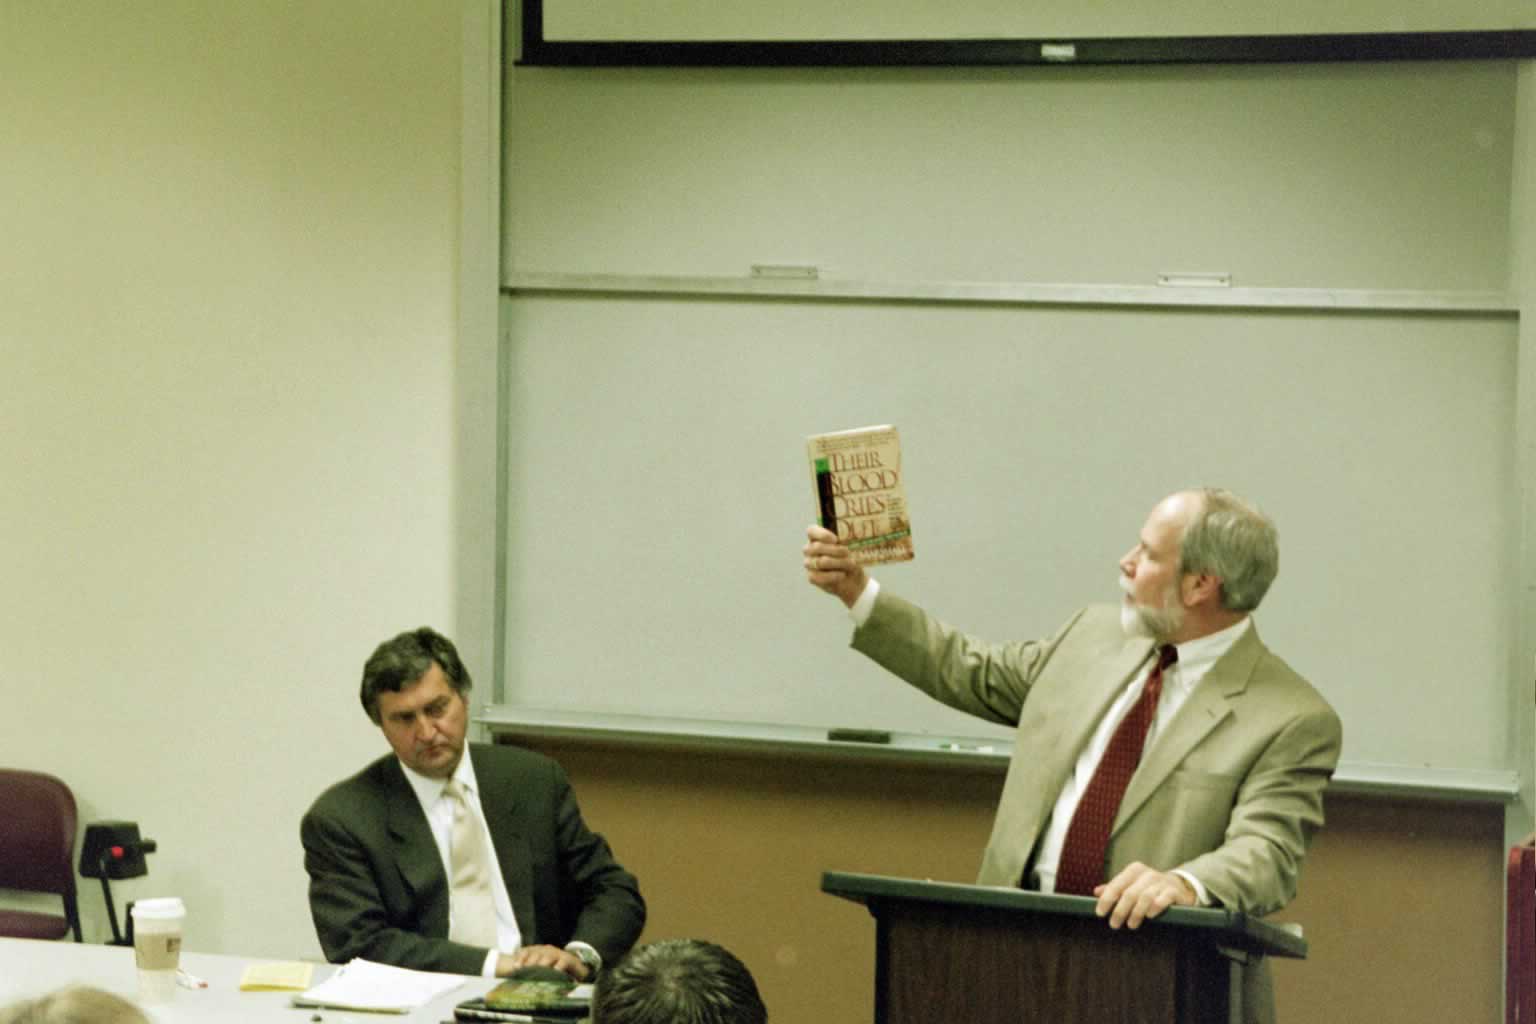 Dr. Naugle standing behind a podium holding up a book with Paul Marshall sitting next to him